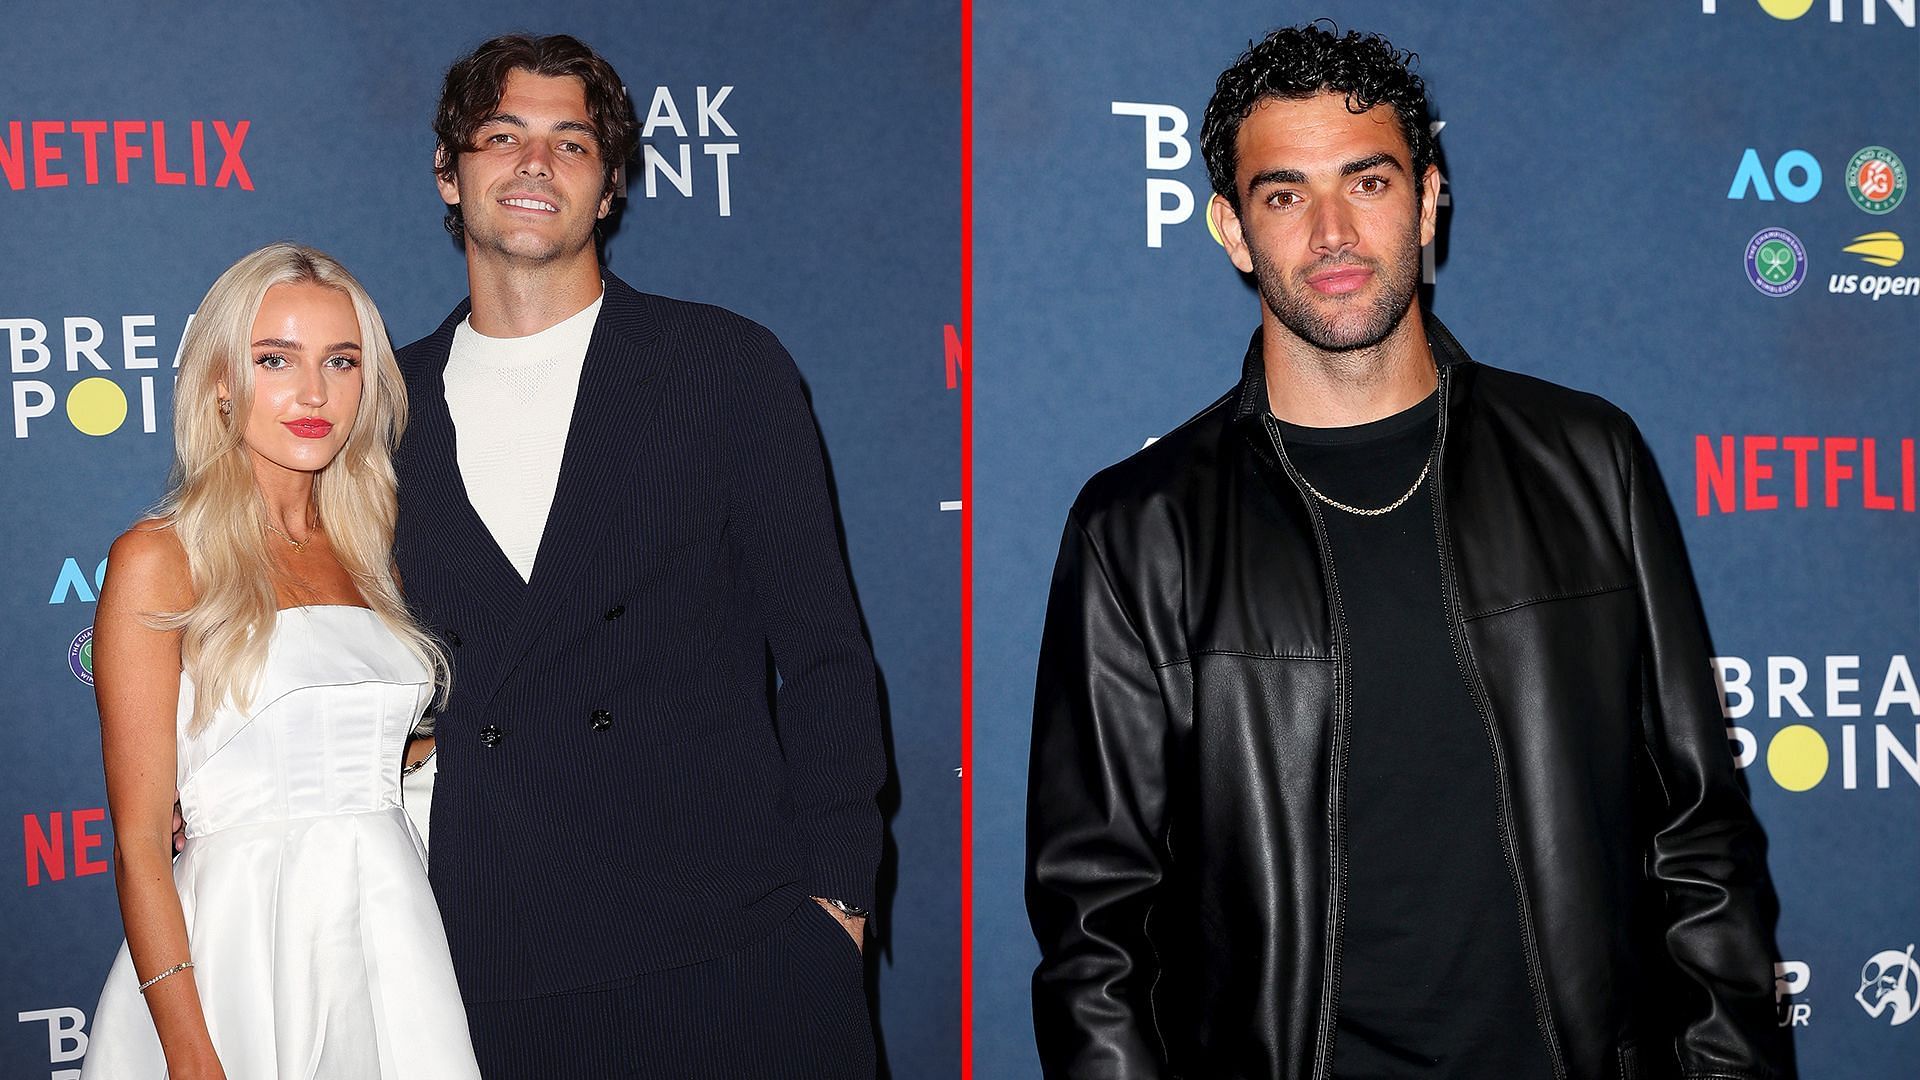 In pictures: Matteo Berrettini, Taylor Fritz, Frances Tiafoe, and others walk the red carpet at Netflix documentary premiere